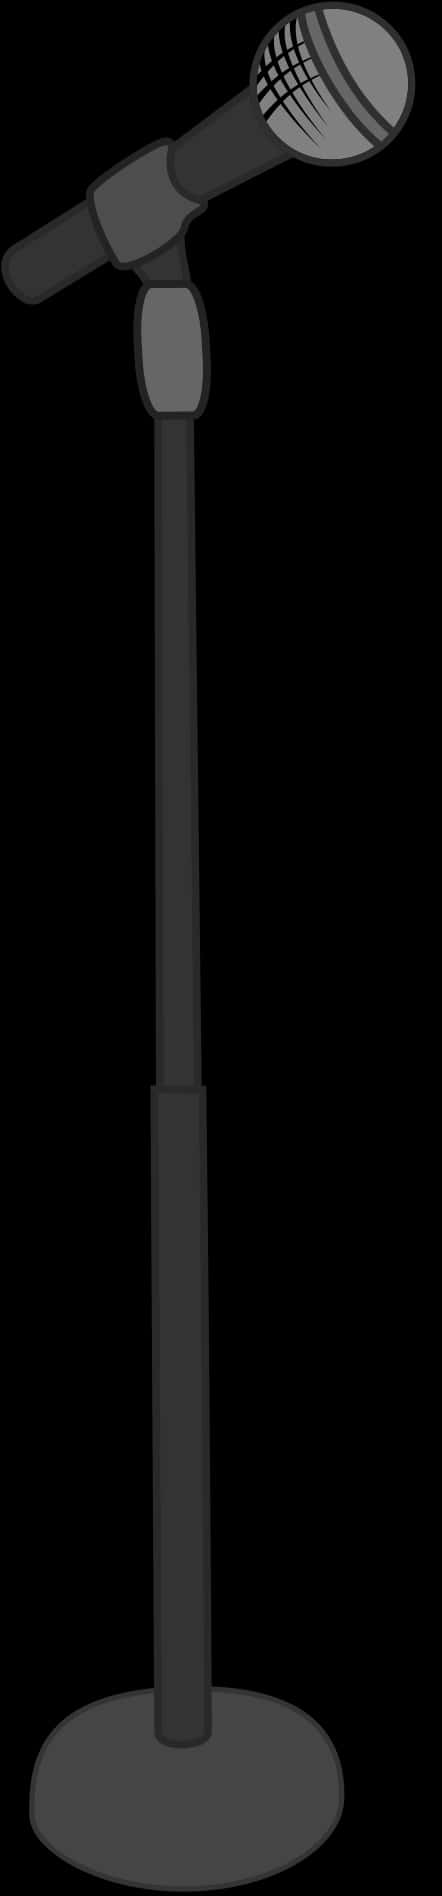 Standing Microphone Graphic PNG image